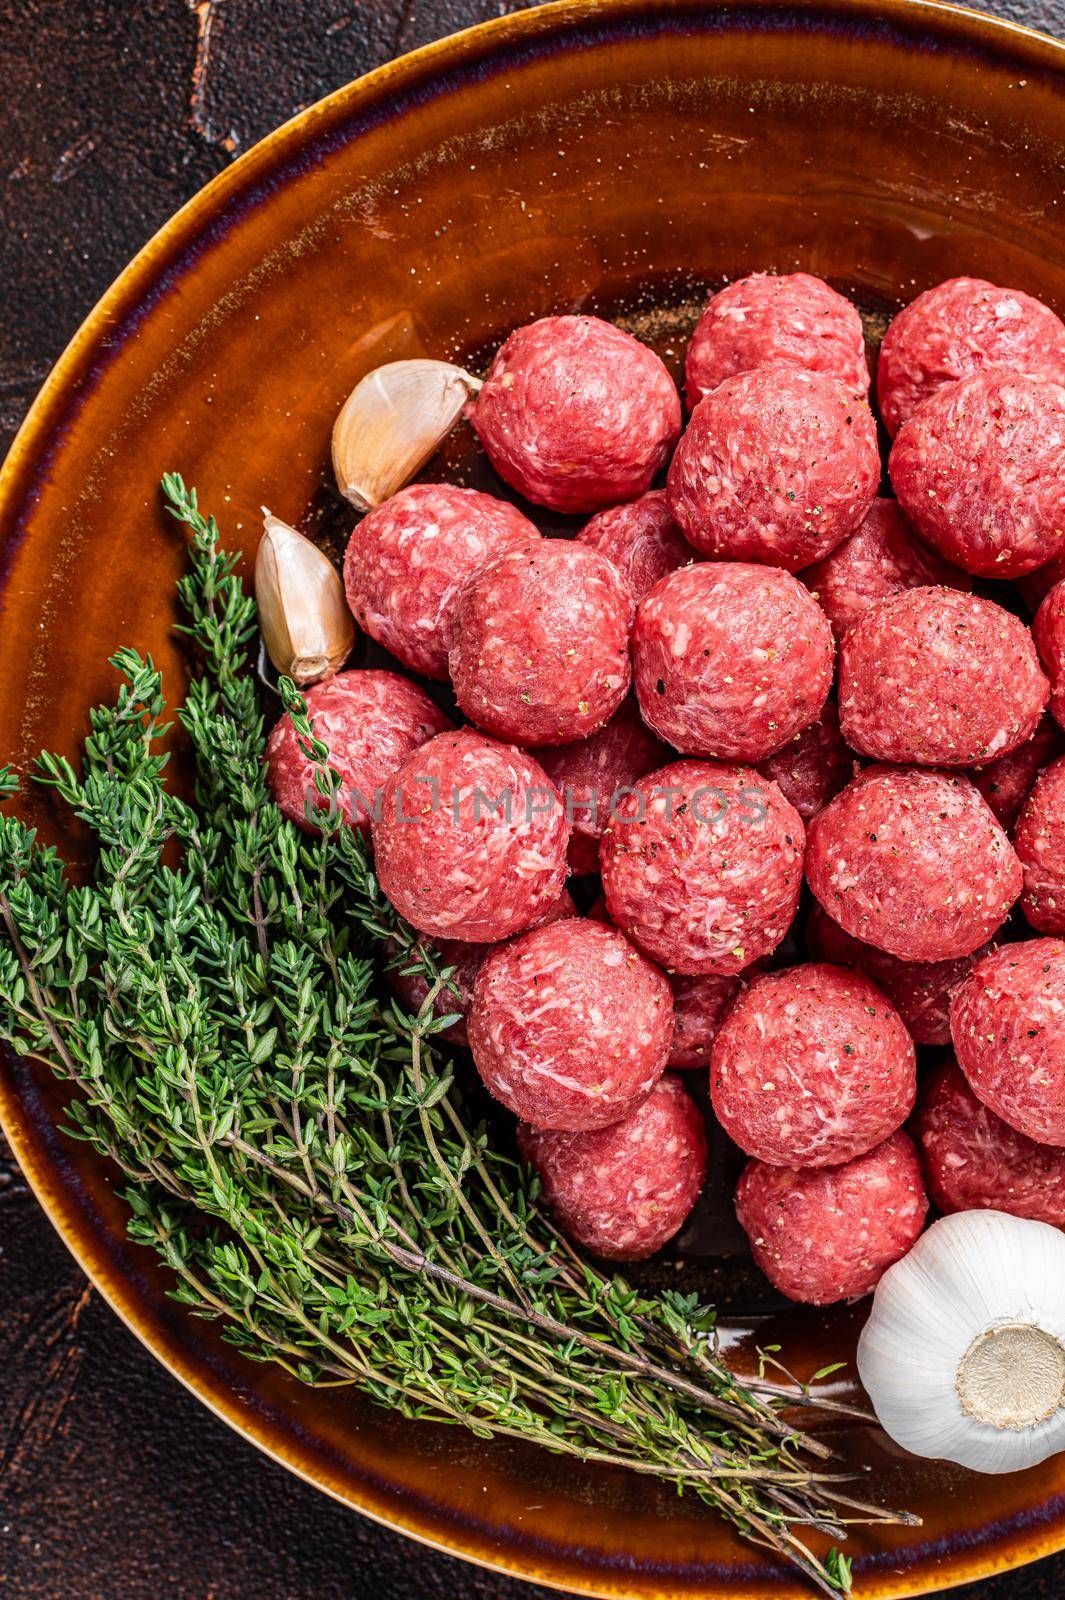 Fresh Raw meatballs from mince beef and pork meat with thyme. Dark background. Top view.